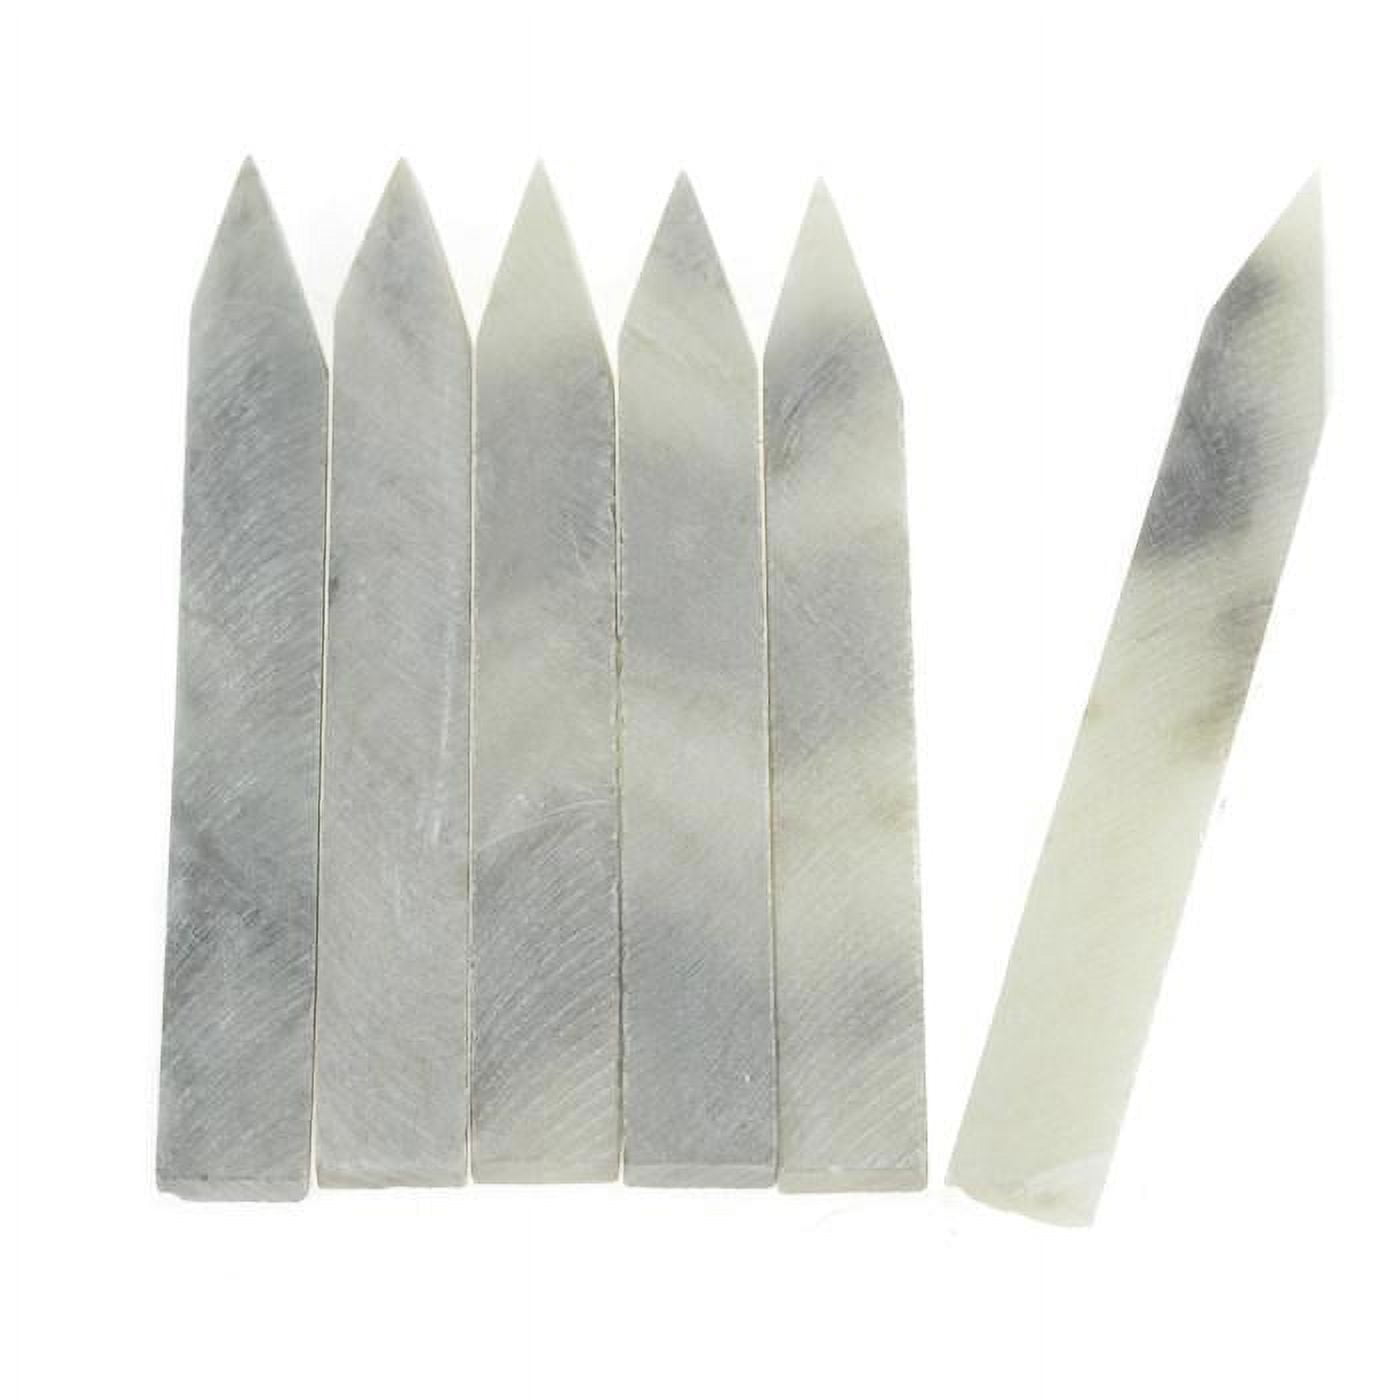 Soapstone Pencil starting at $ 20.00⁣ ⁣ Soapstone was a frequently